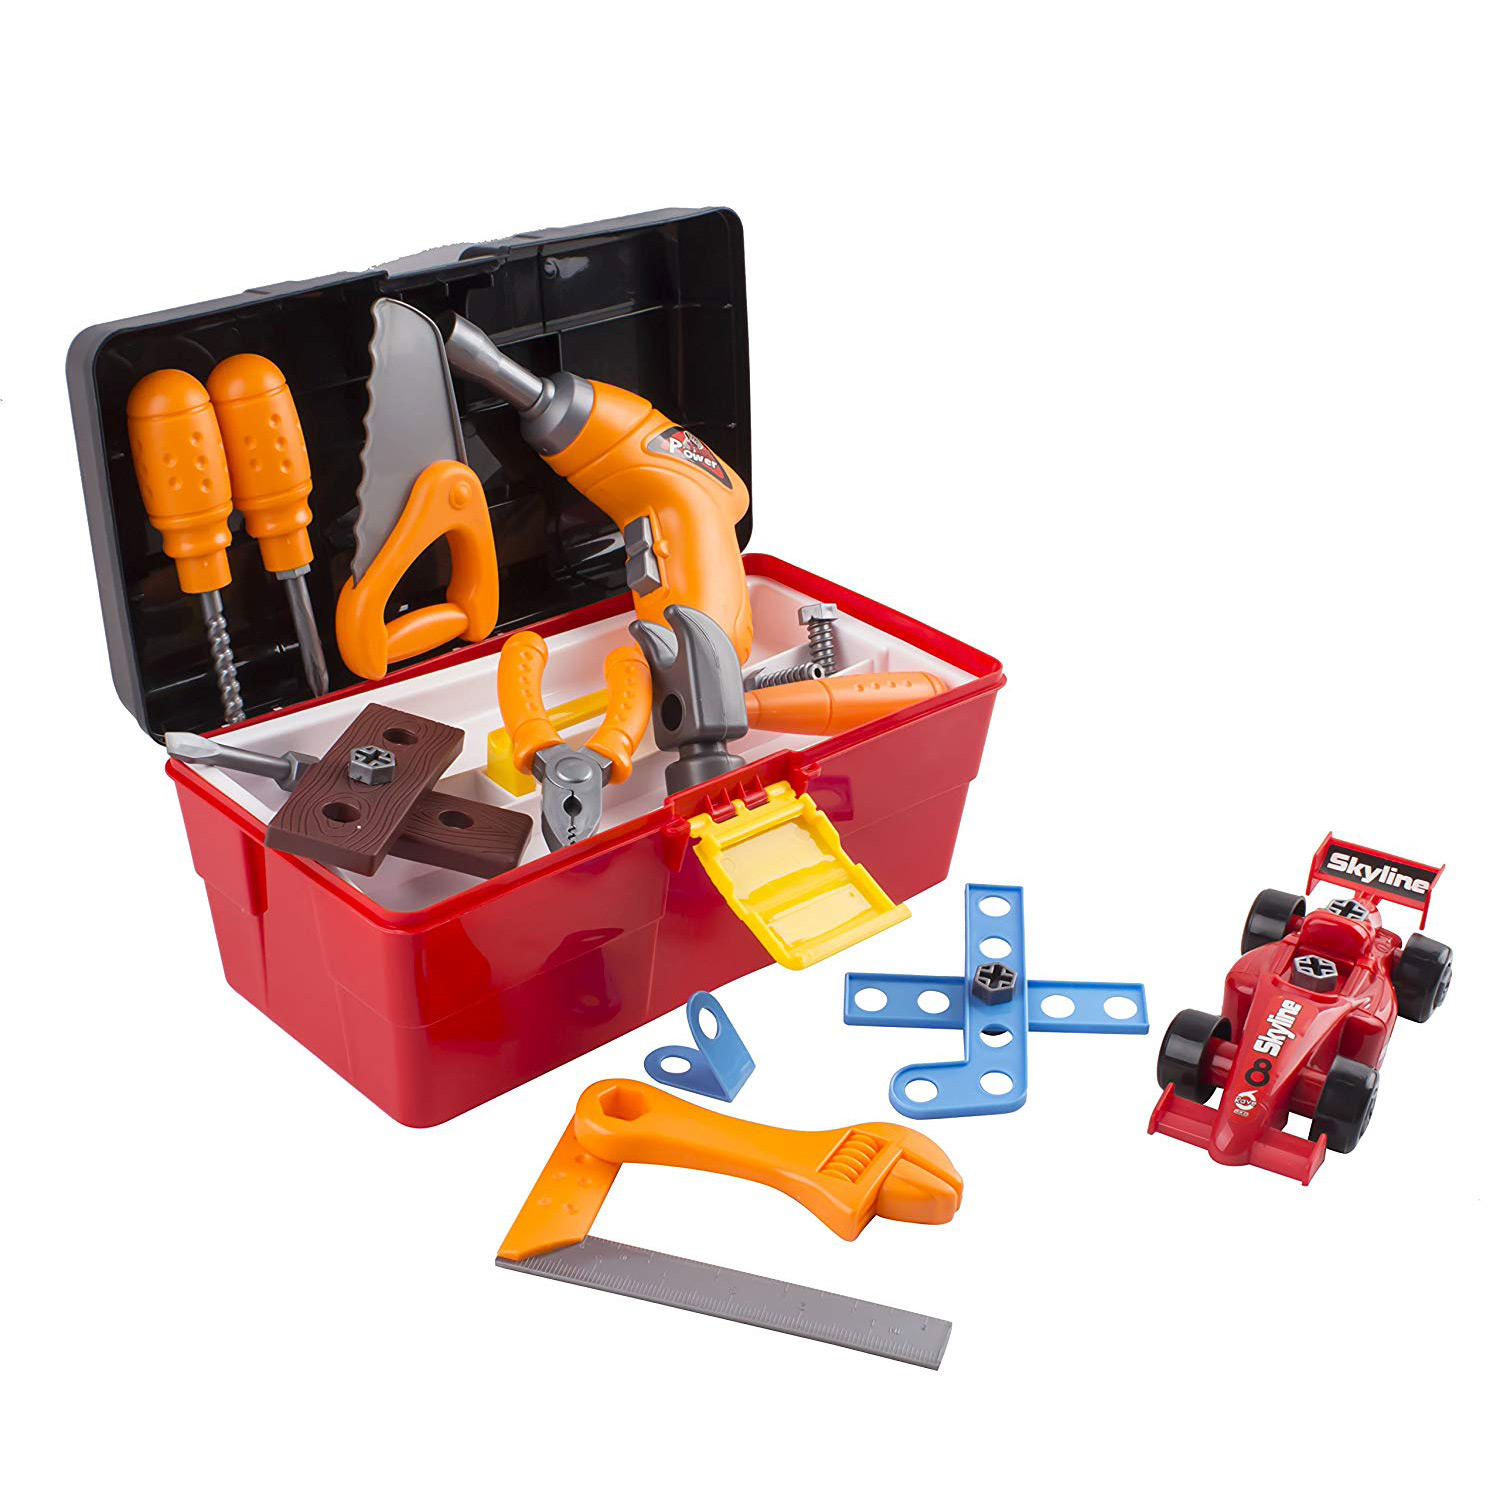 44 Piece Toy Tool Set With Construction Kit Accessories Portable Realistic Tools Box Including Electric Drill Hammer Wrench Screwdriver F1 Car Perfect For Boys Children’s Educational STEM Pretend Play